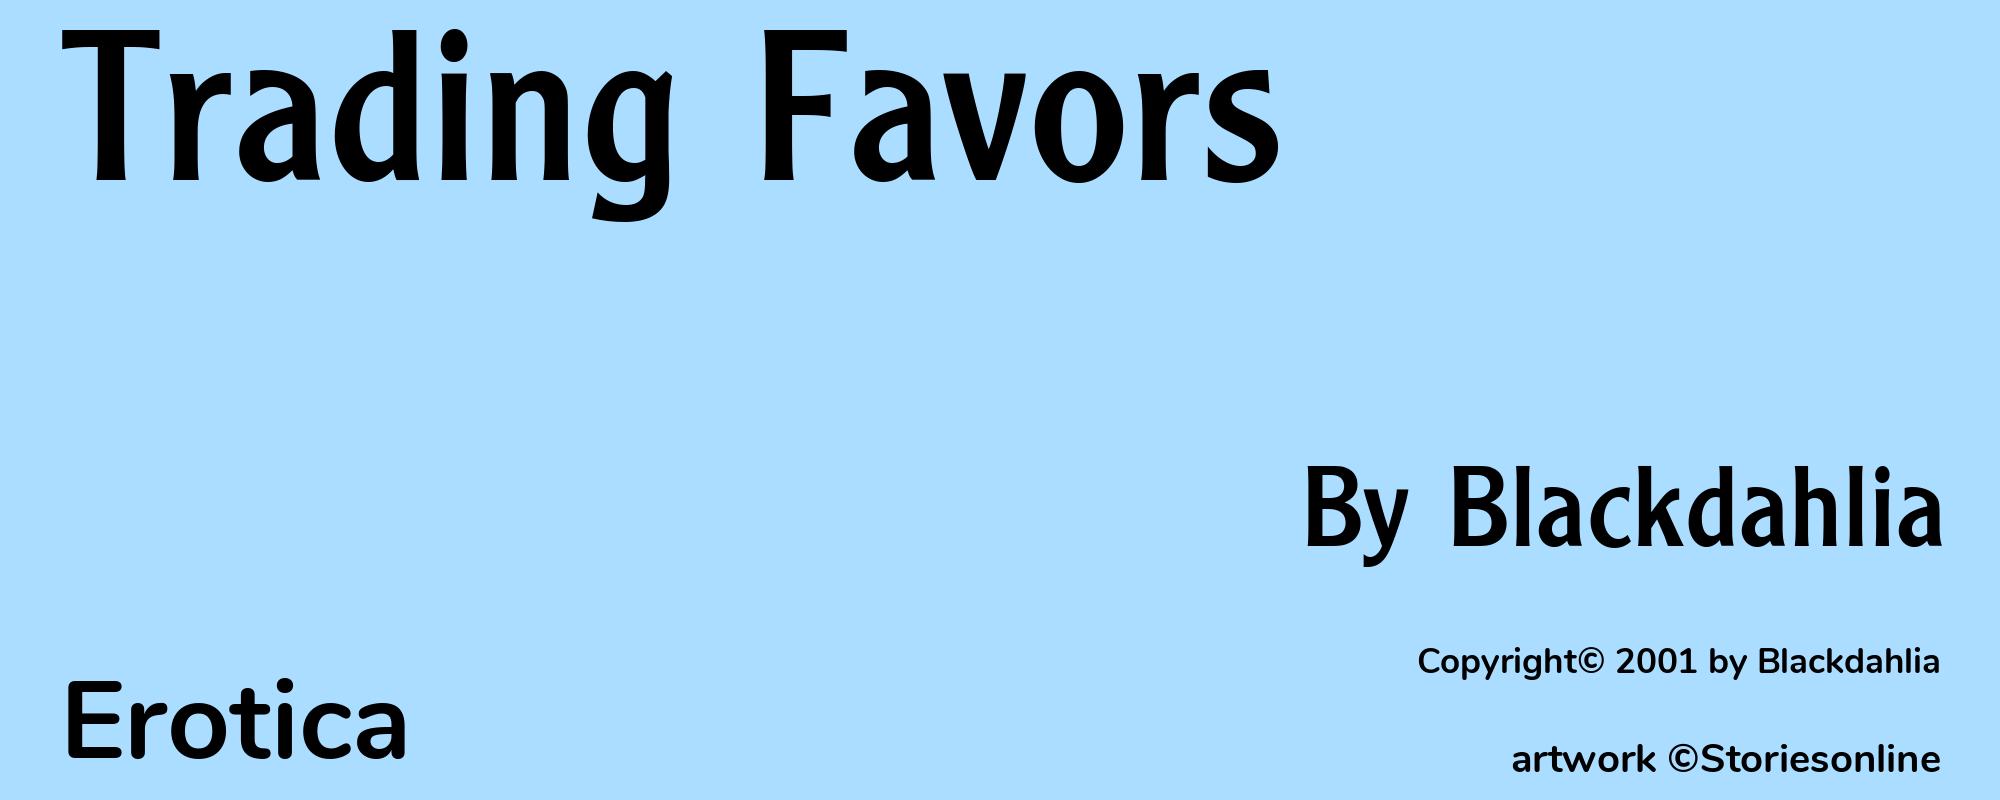 Trading Favors - Cover